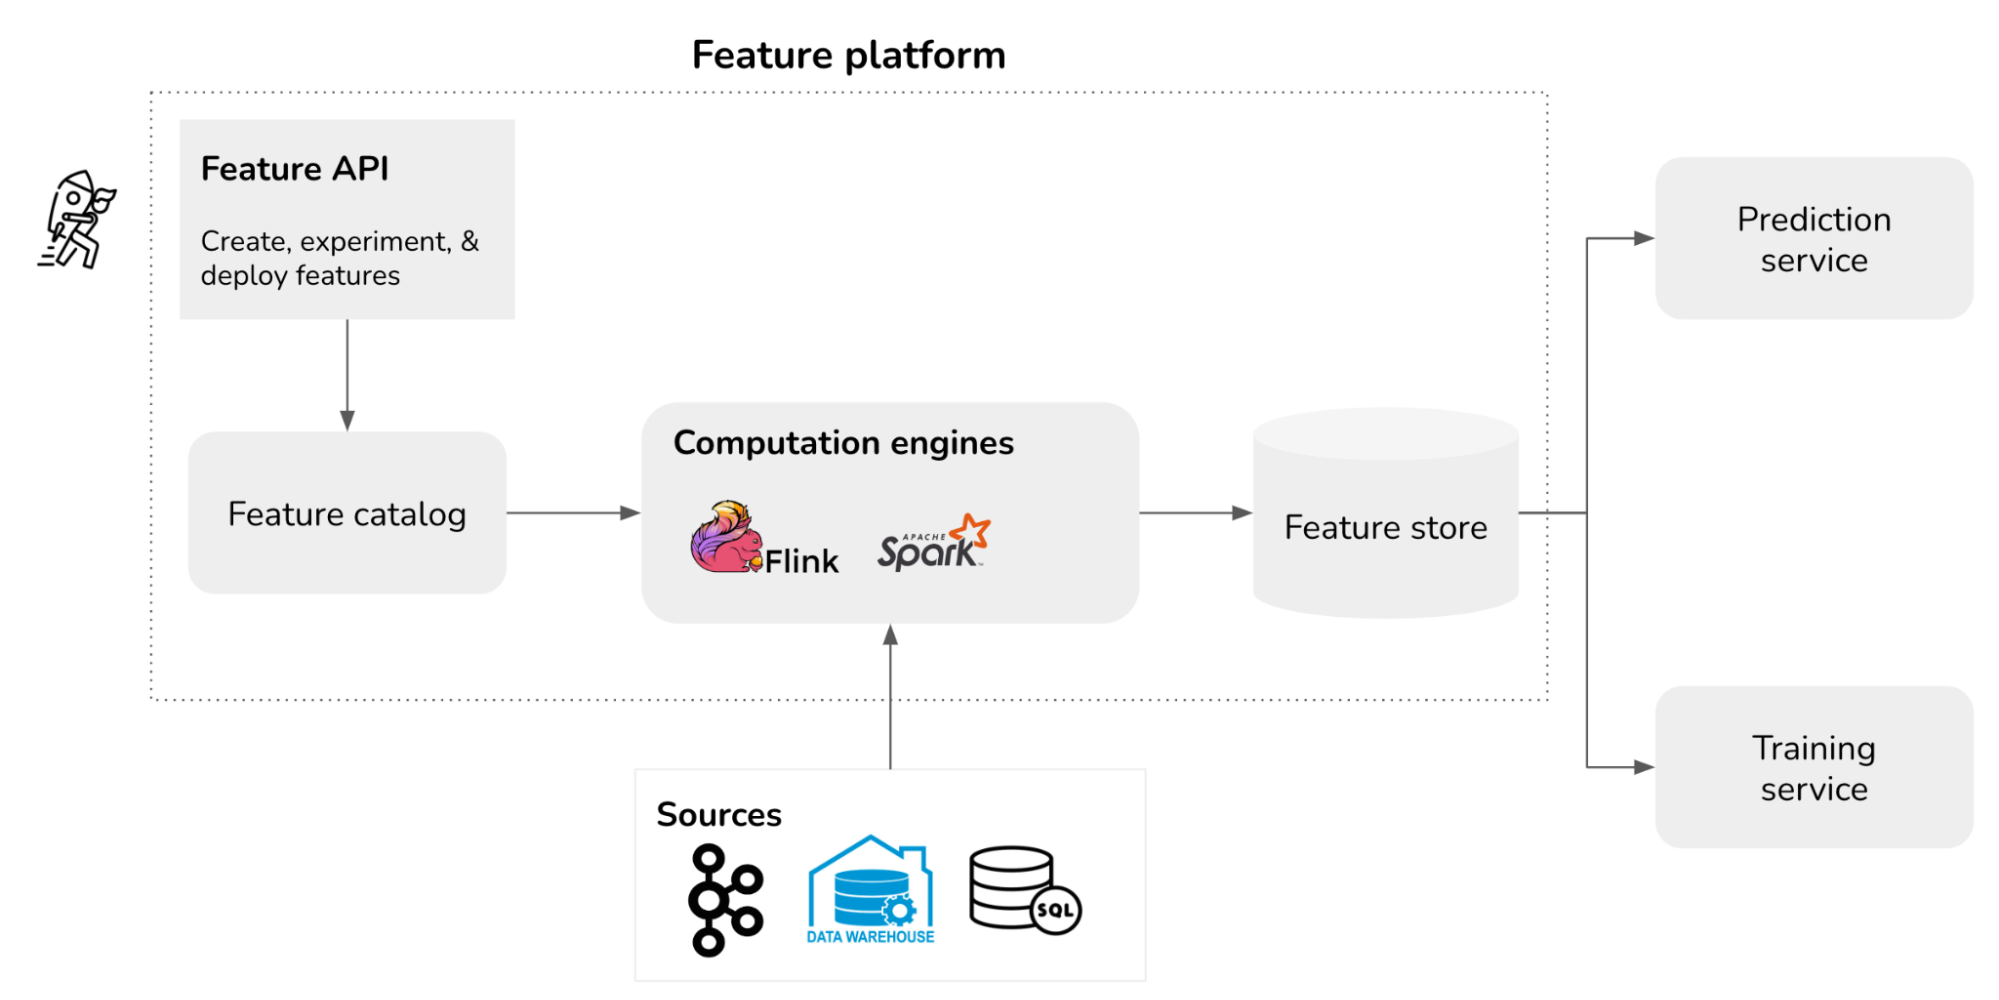 Where feature platforms fit into the MLOps stack